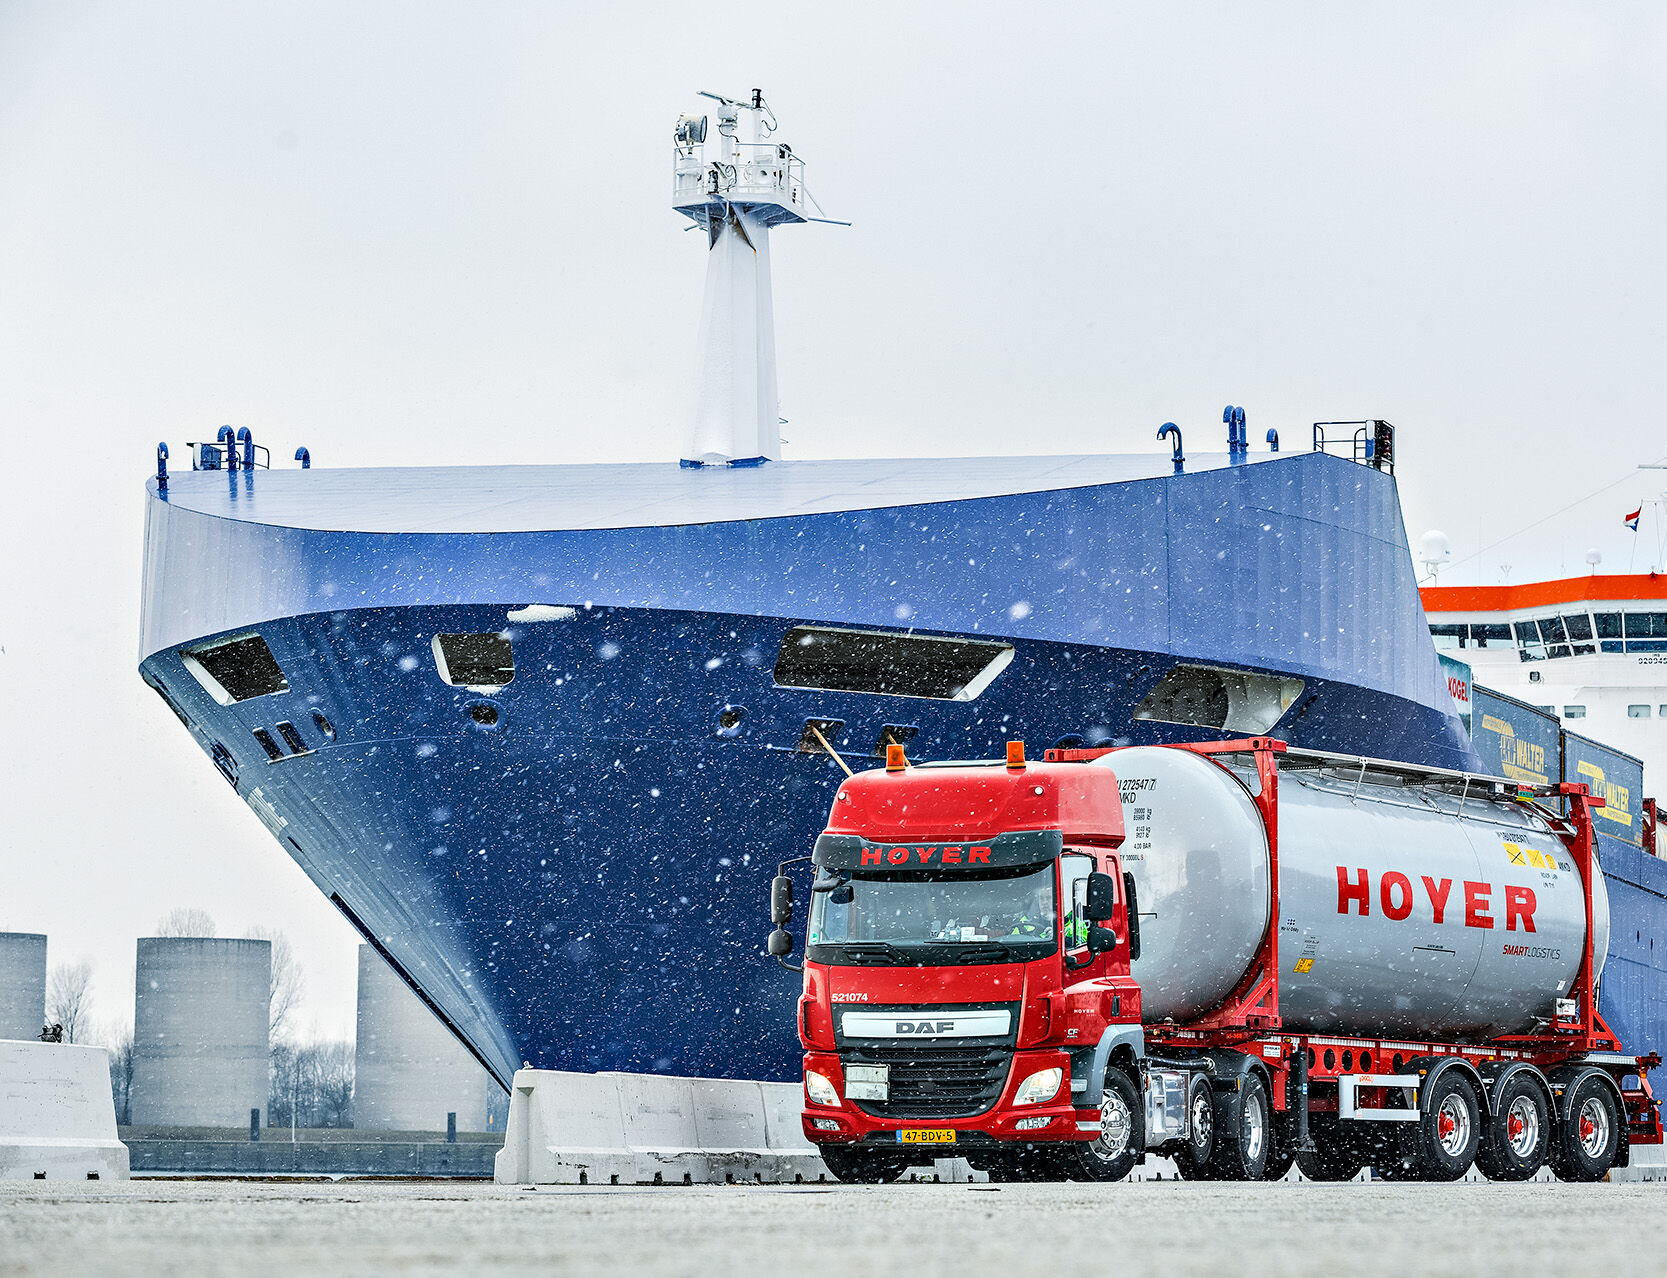 HOYER truck with chemical tank container in front of a ship